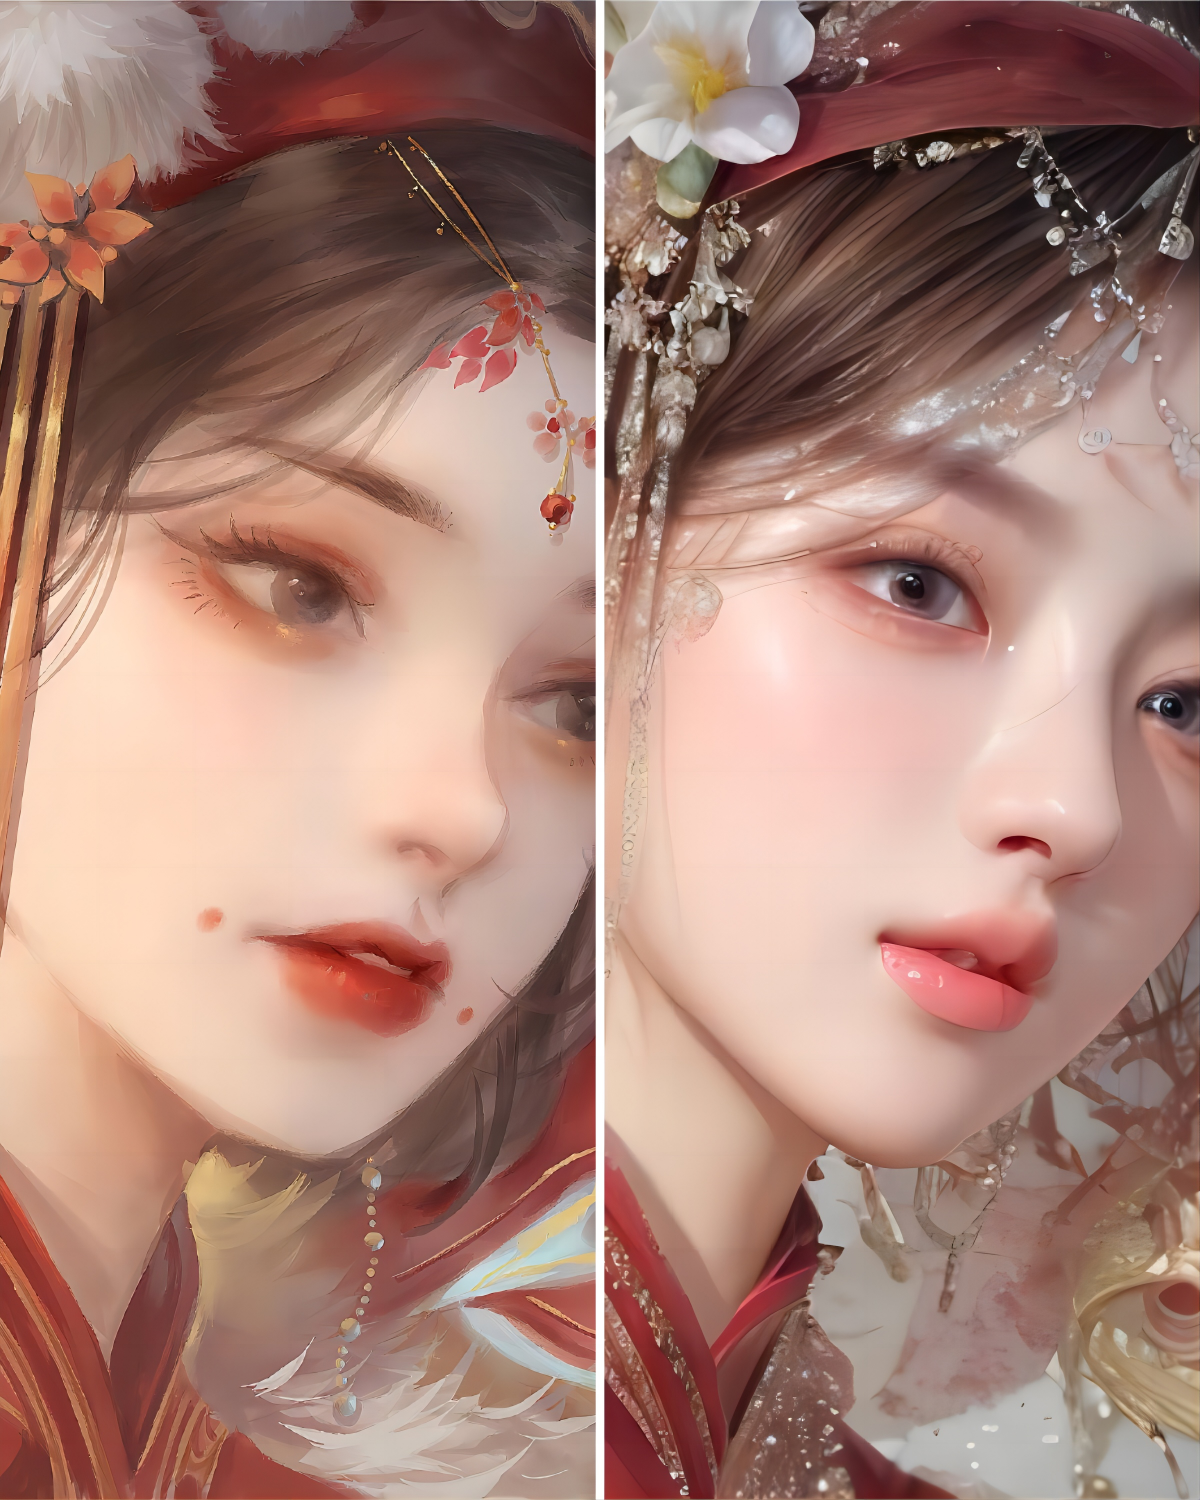 Upload a picture and click to transform anime girl into real girl. Closeup picture is prefer.<br><br>上传图片，一键将动漫女孩转化为真人。最好是特写照片。<br><br>画像をアップロードしてクリックすると、アニメの女の子が本物の女の子に変身します。クローズアップ画像が望ましい。